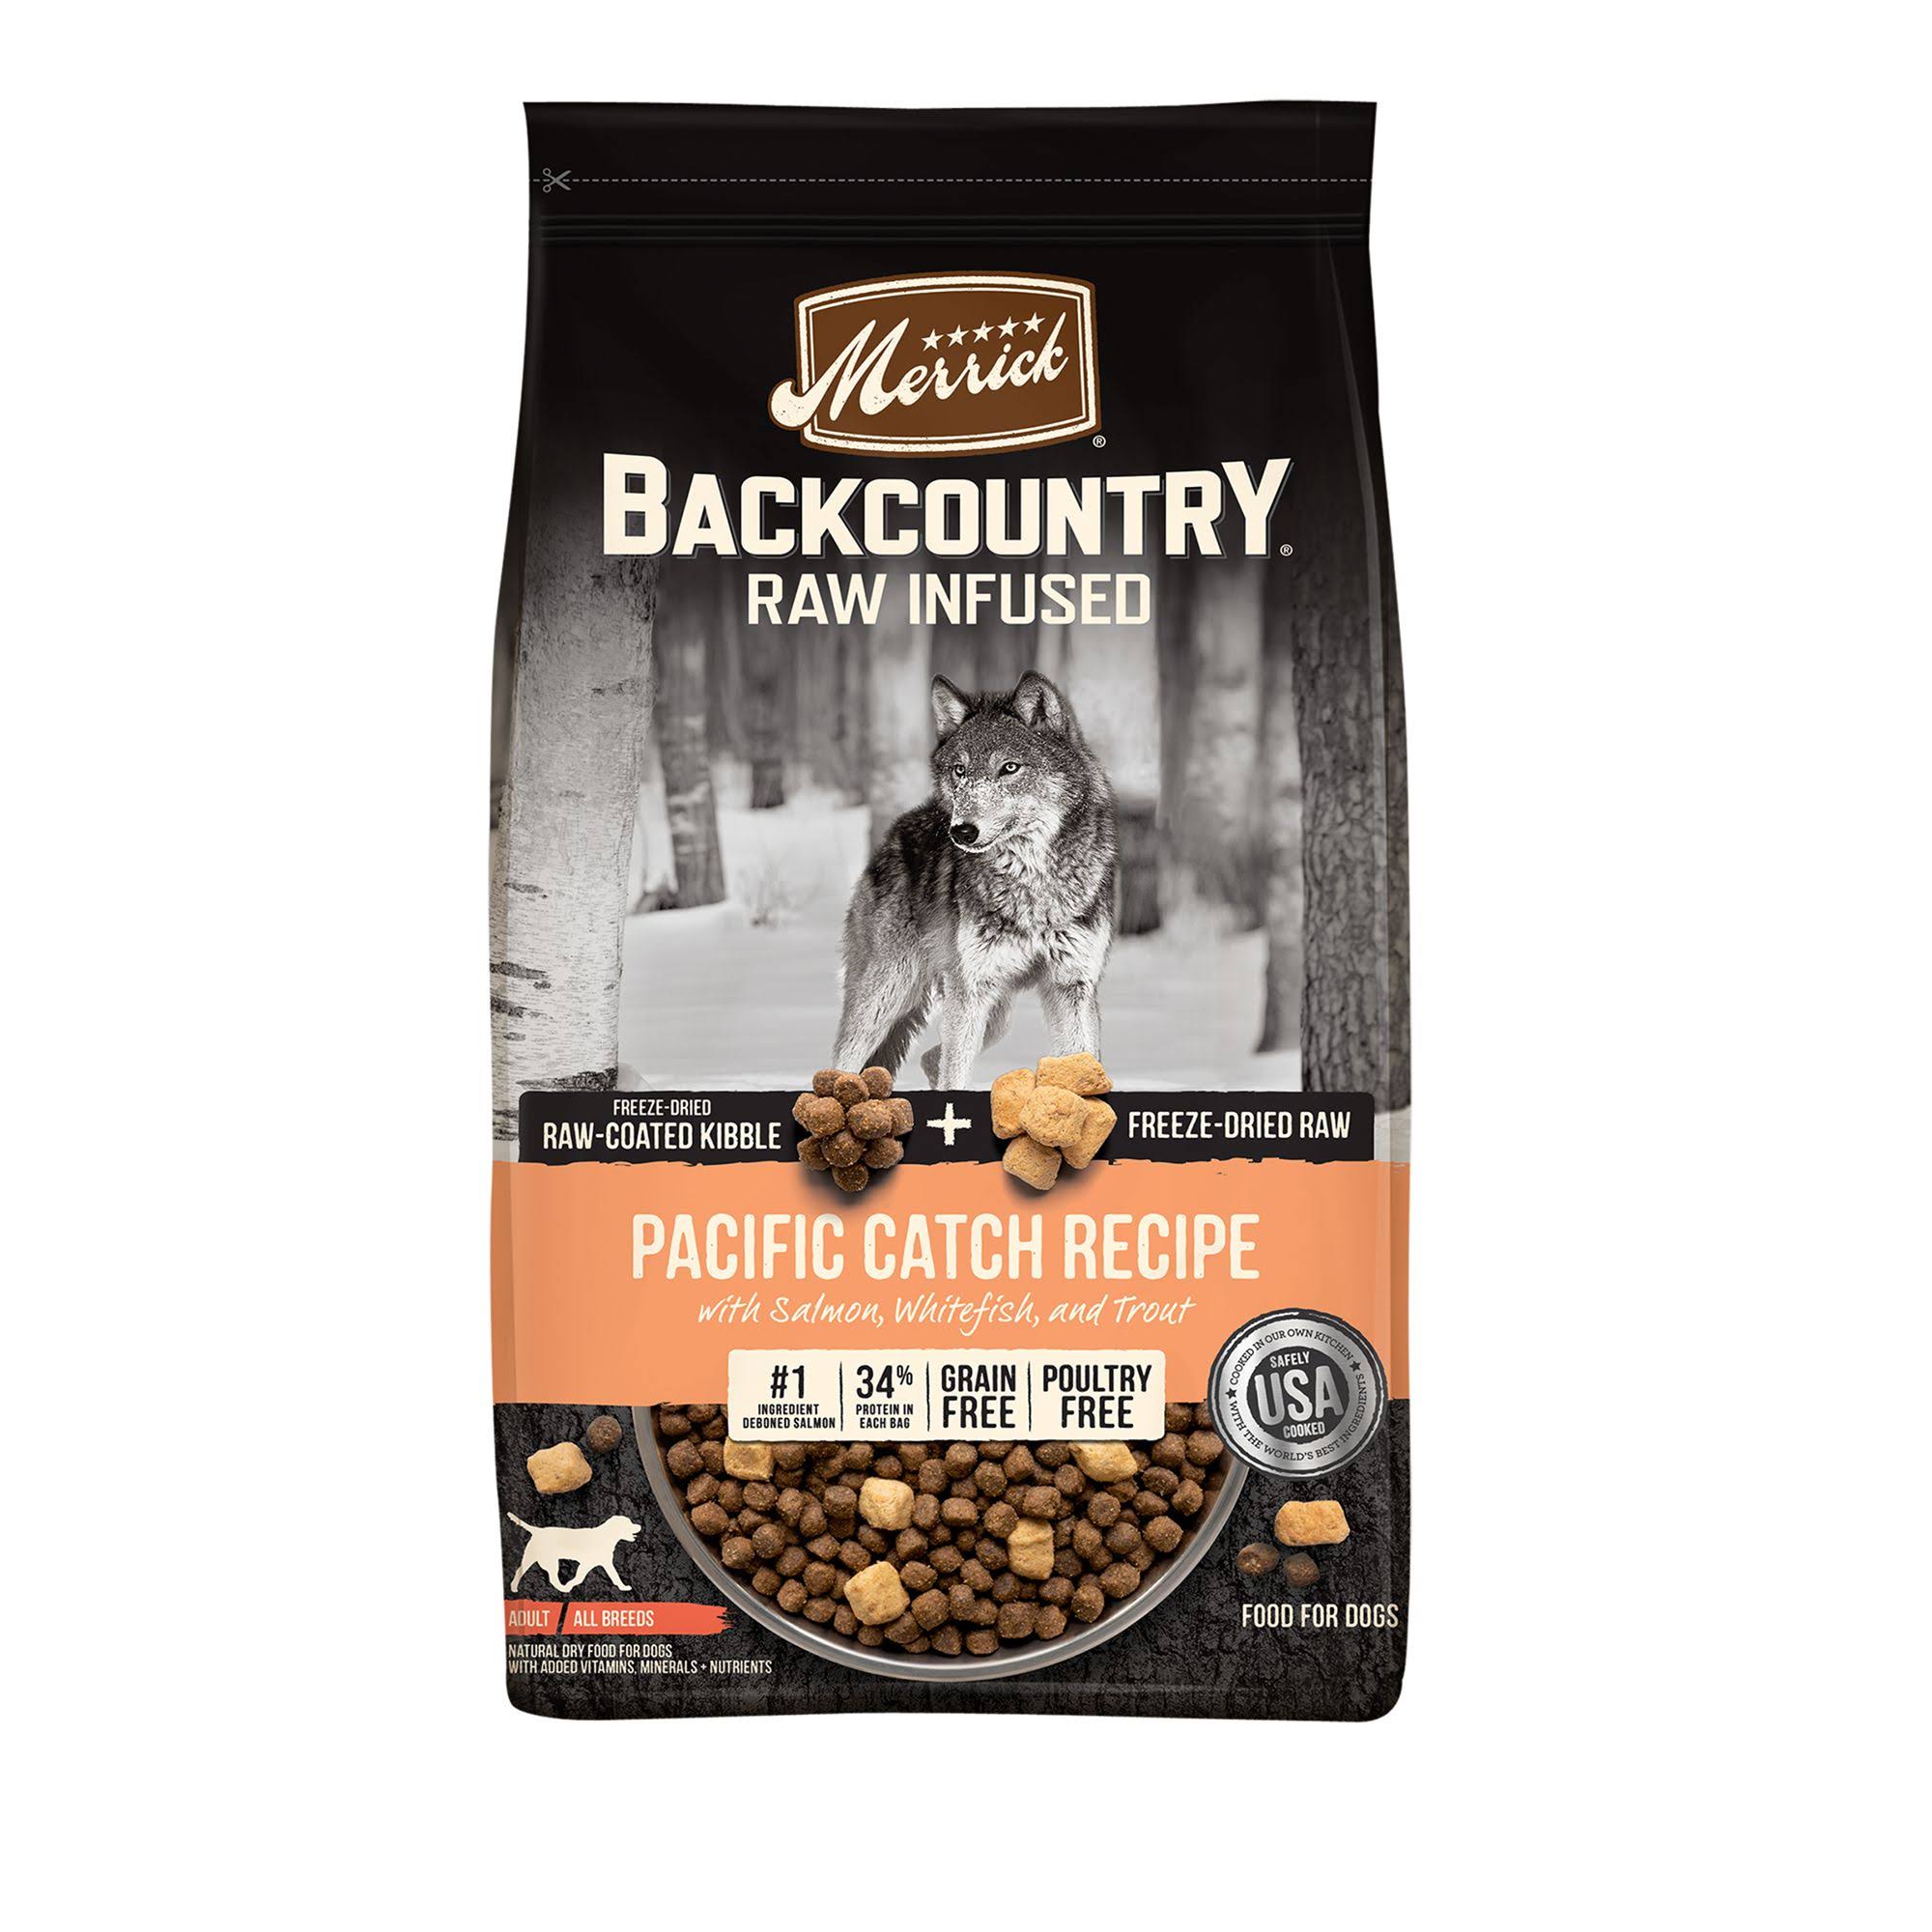 Merrick Backcountry Raw Infused Pacific Catch Dog Food [20lb]